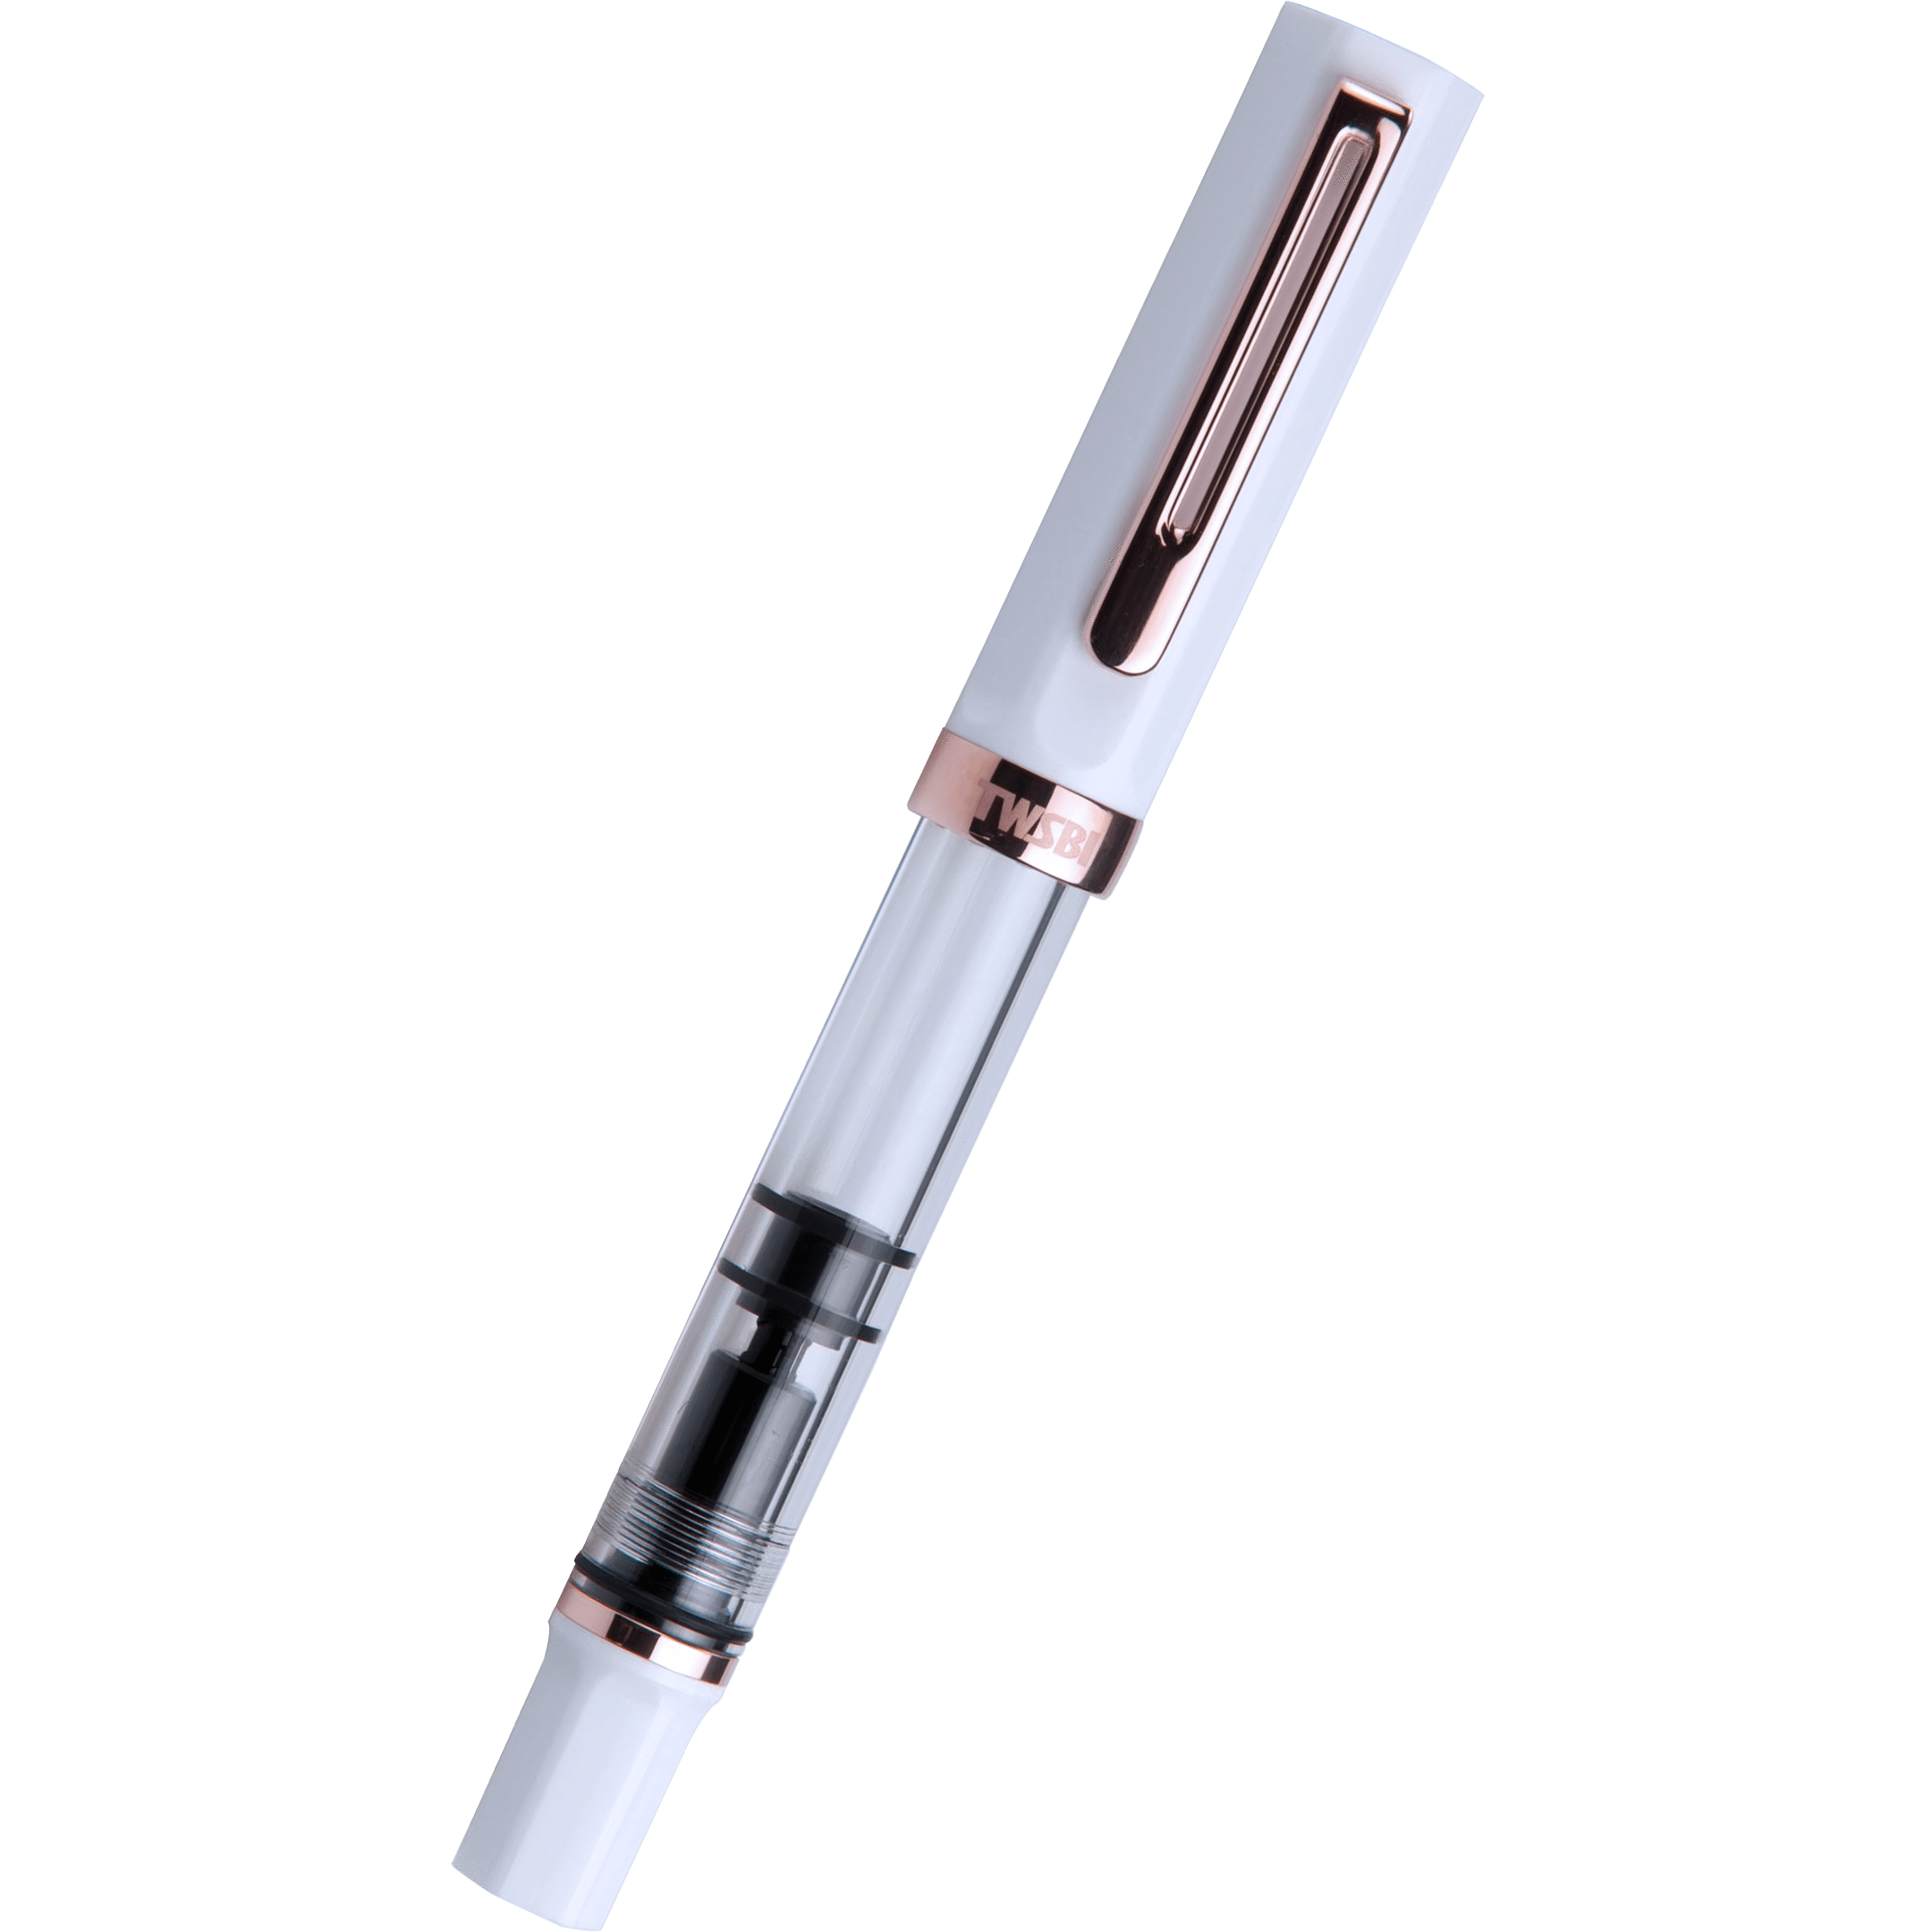 Pen Review: TWSBI ECO White Rosegold Fountain Pen - The Well-Appointed Desk